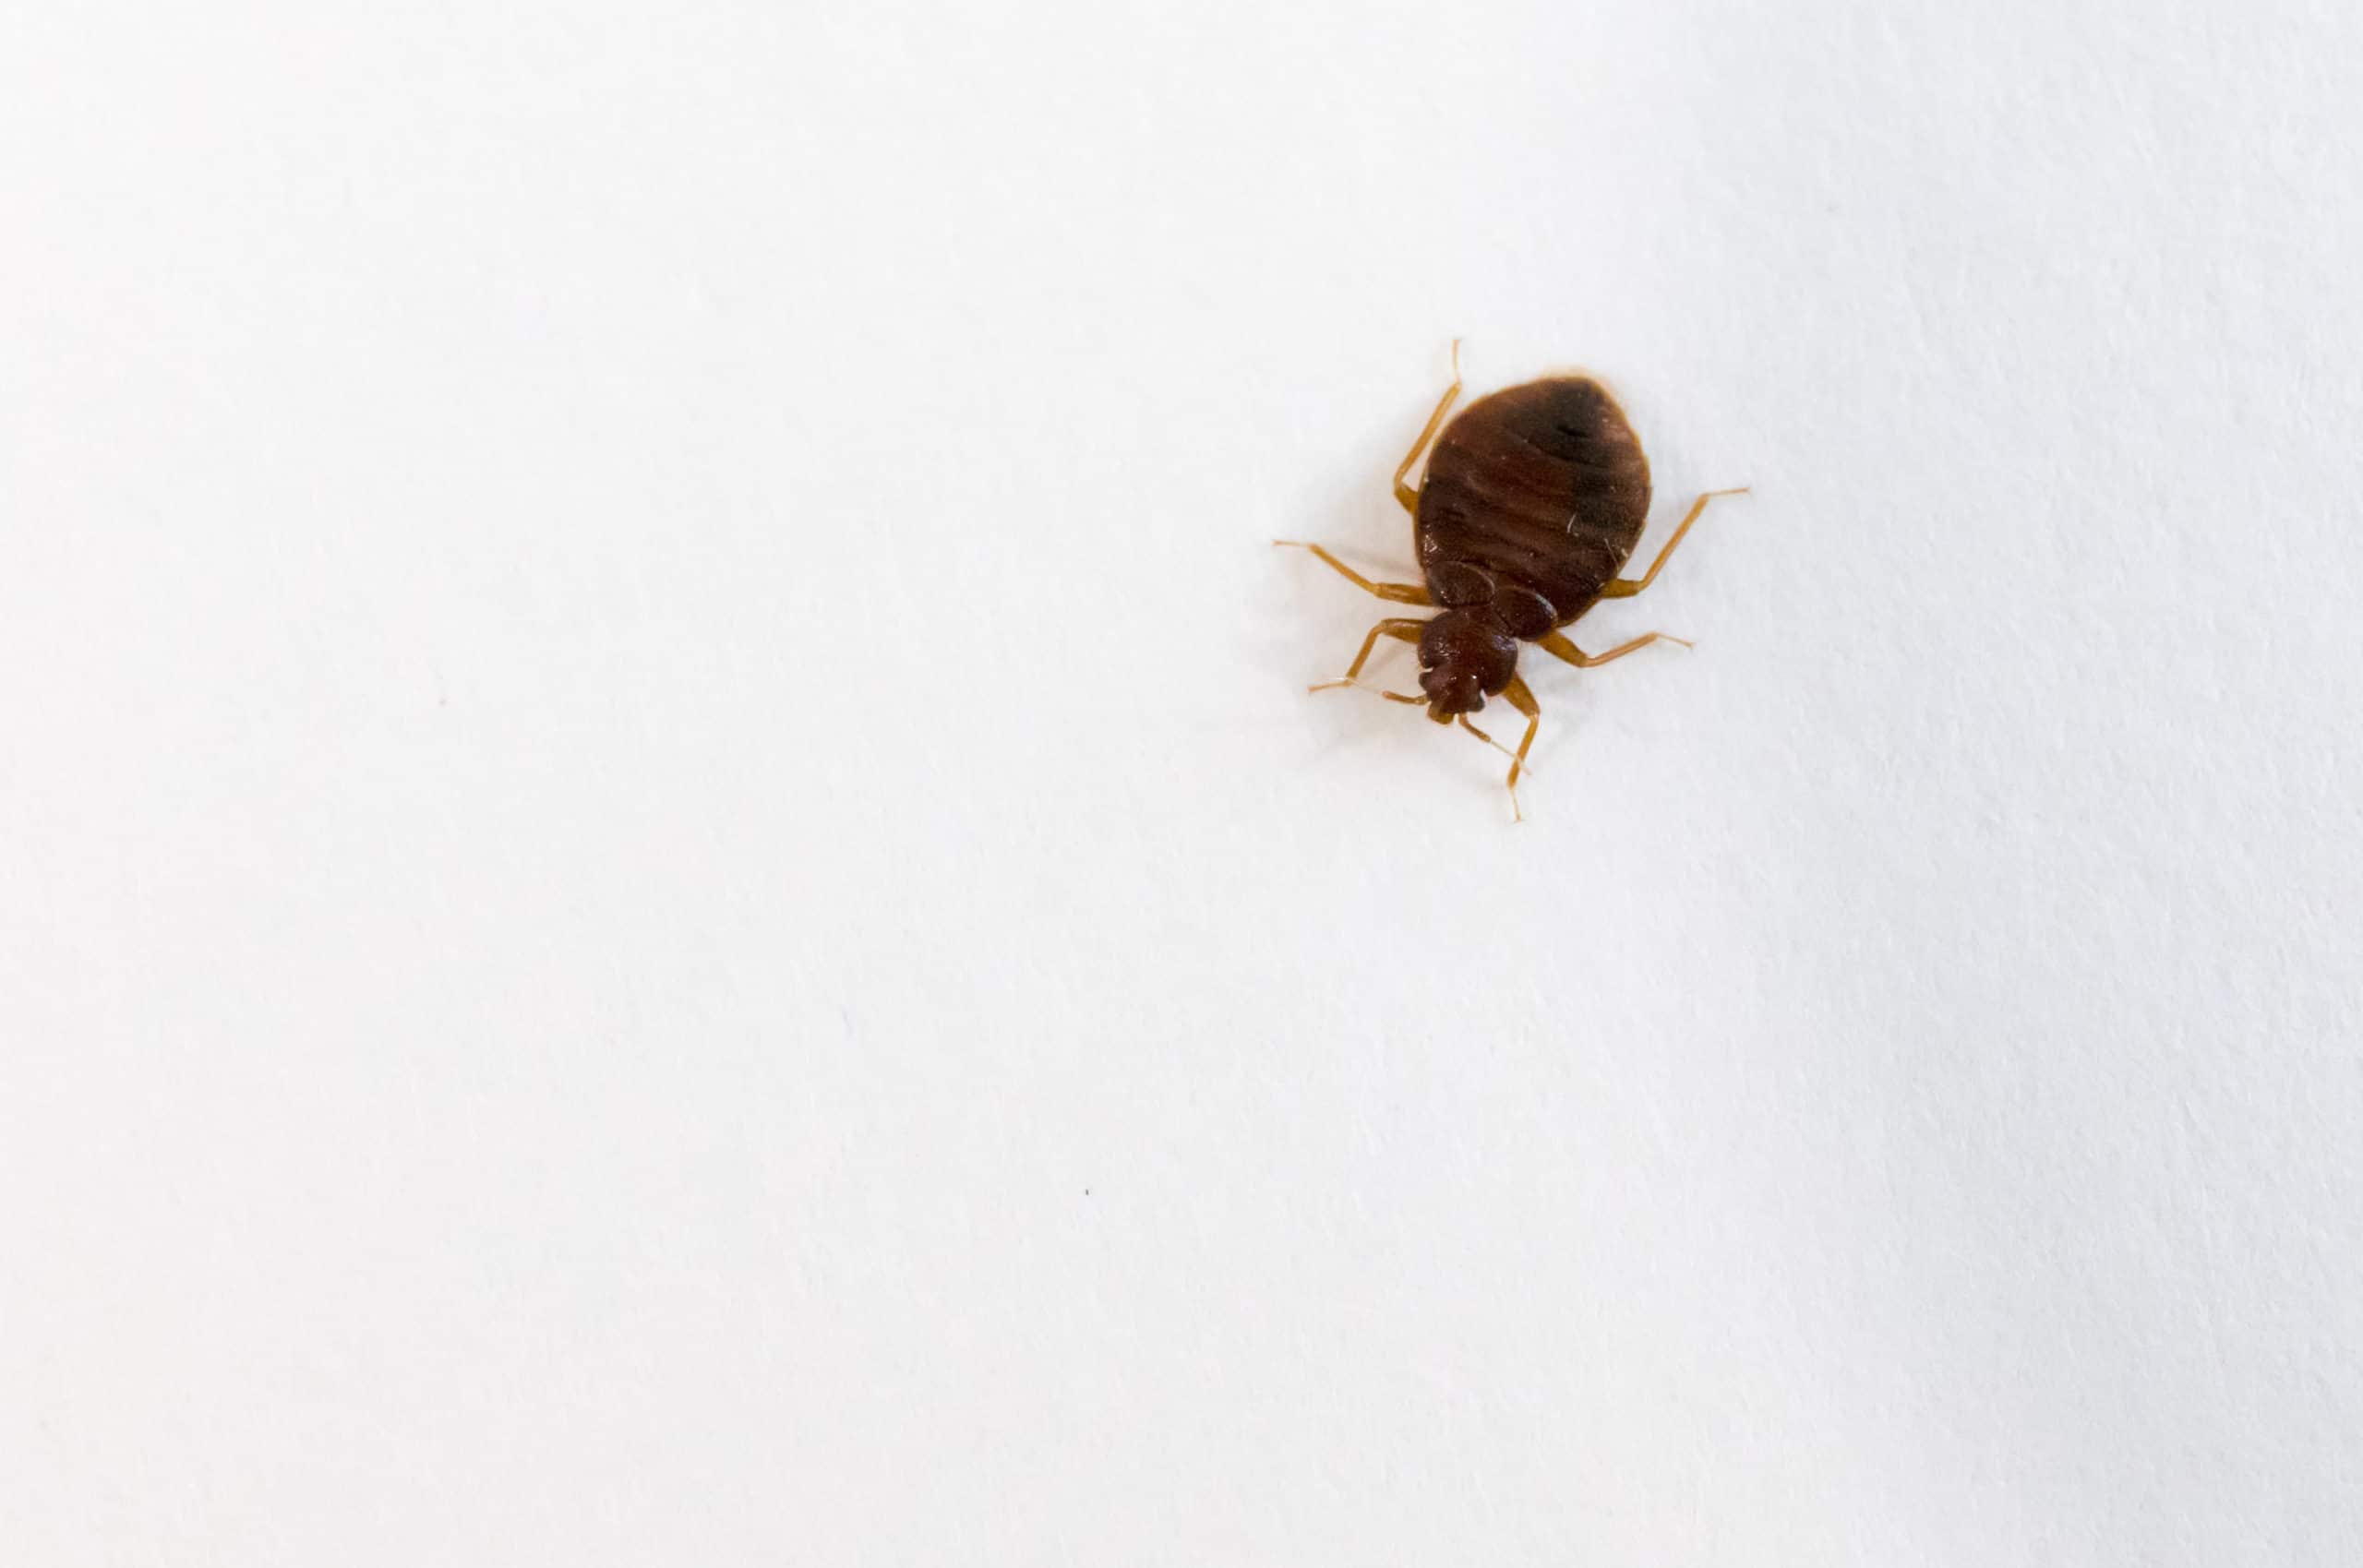 A top view of a bed bug